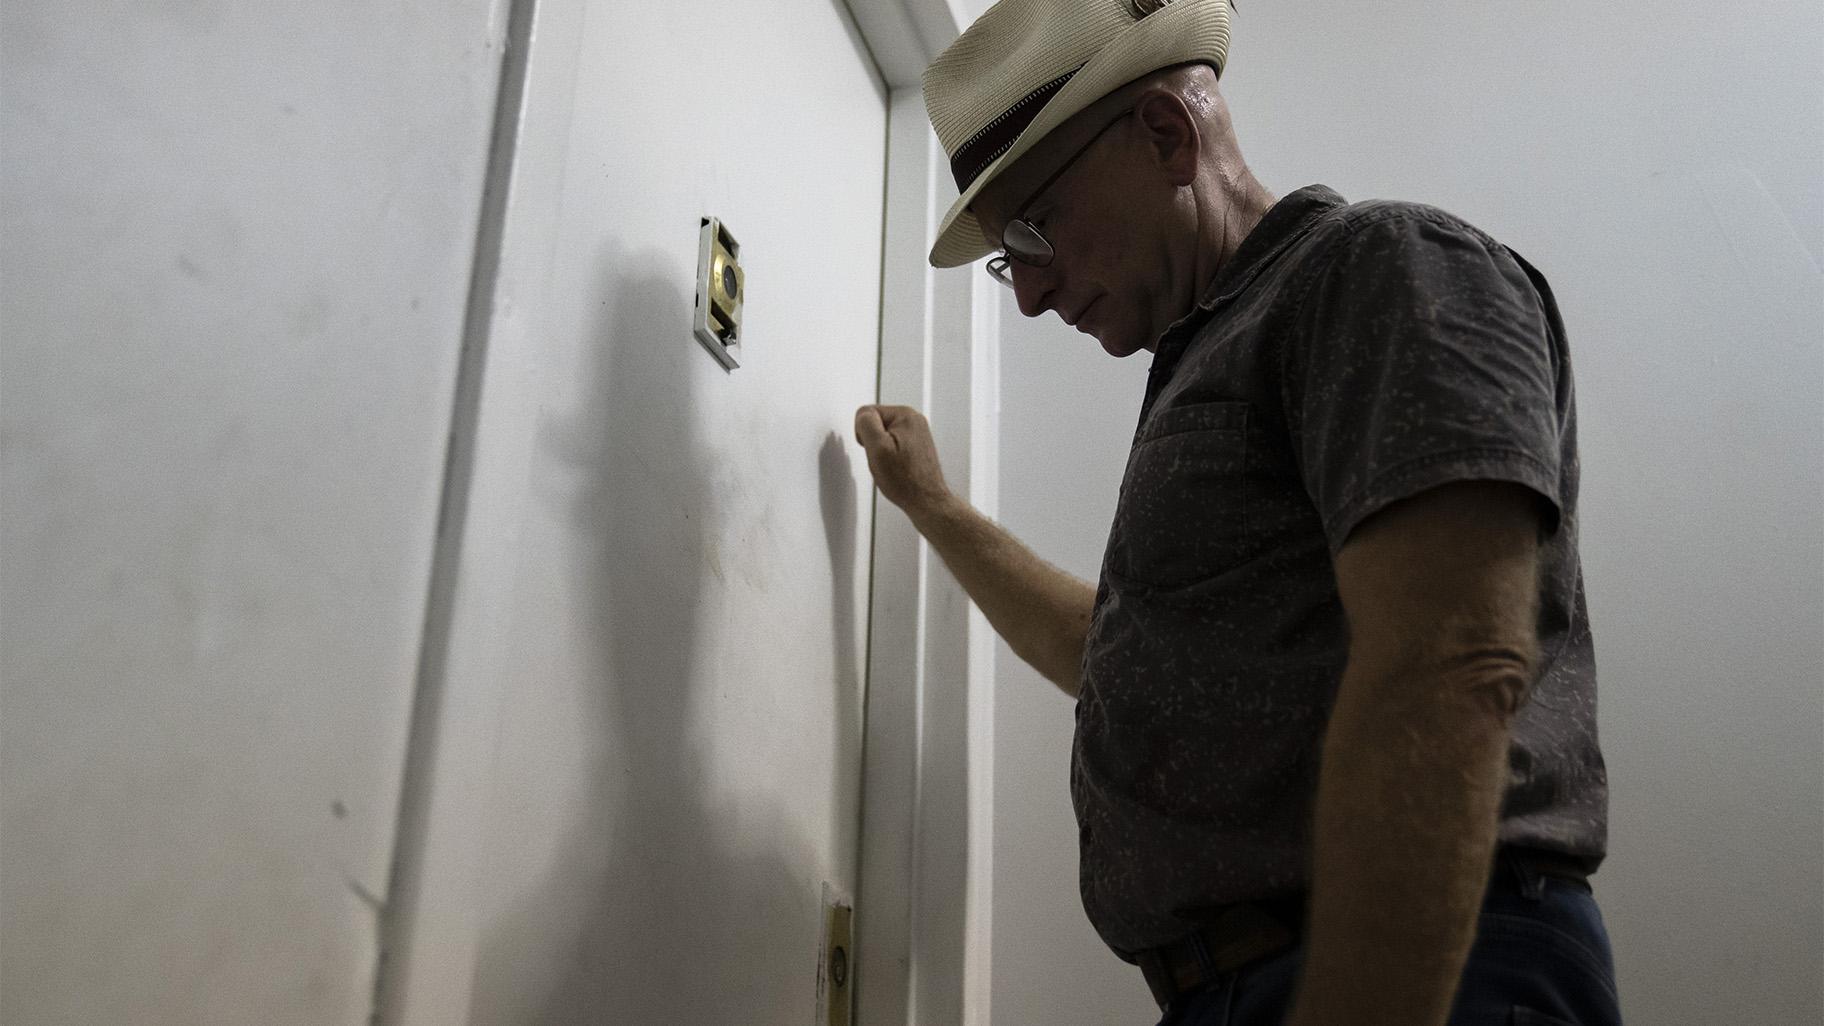 Gary Zaremba knocks on an apartment door as he checks in with tenants to discuss building maintenance at one of his at properties, Thursday, Aug. 12, 2021, in the Queens borough of New York. (AP Photo / John Minchillo)